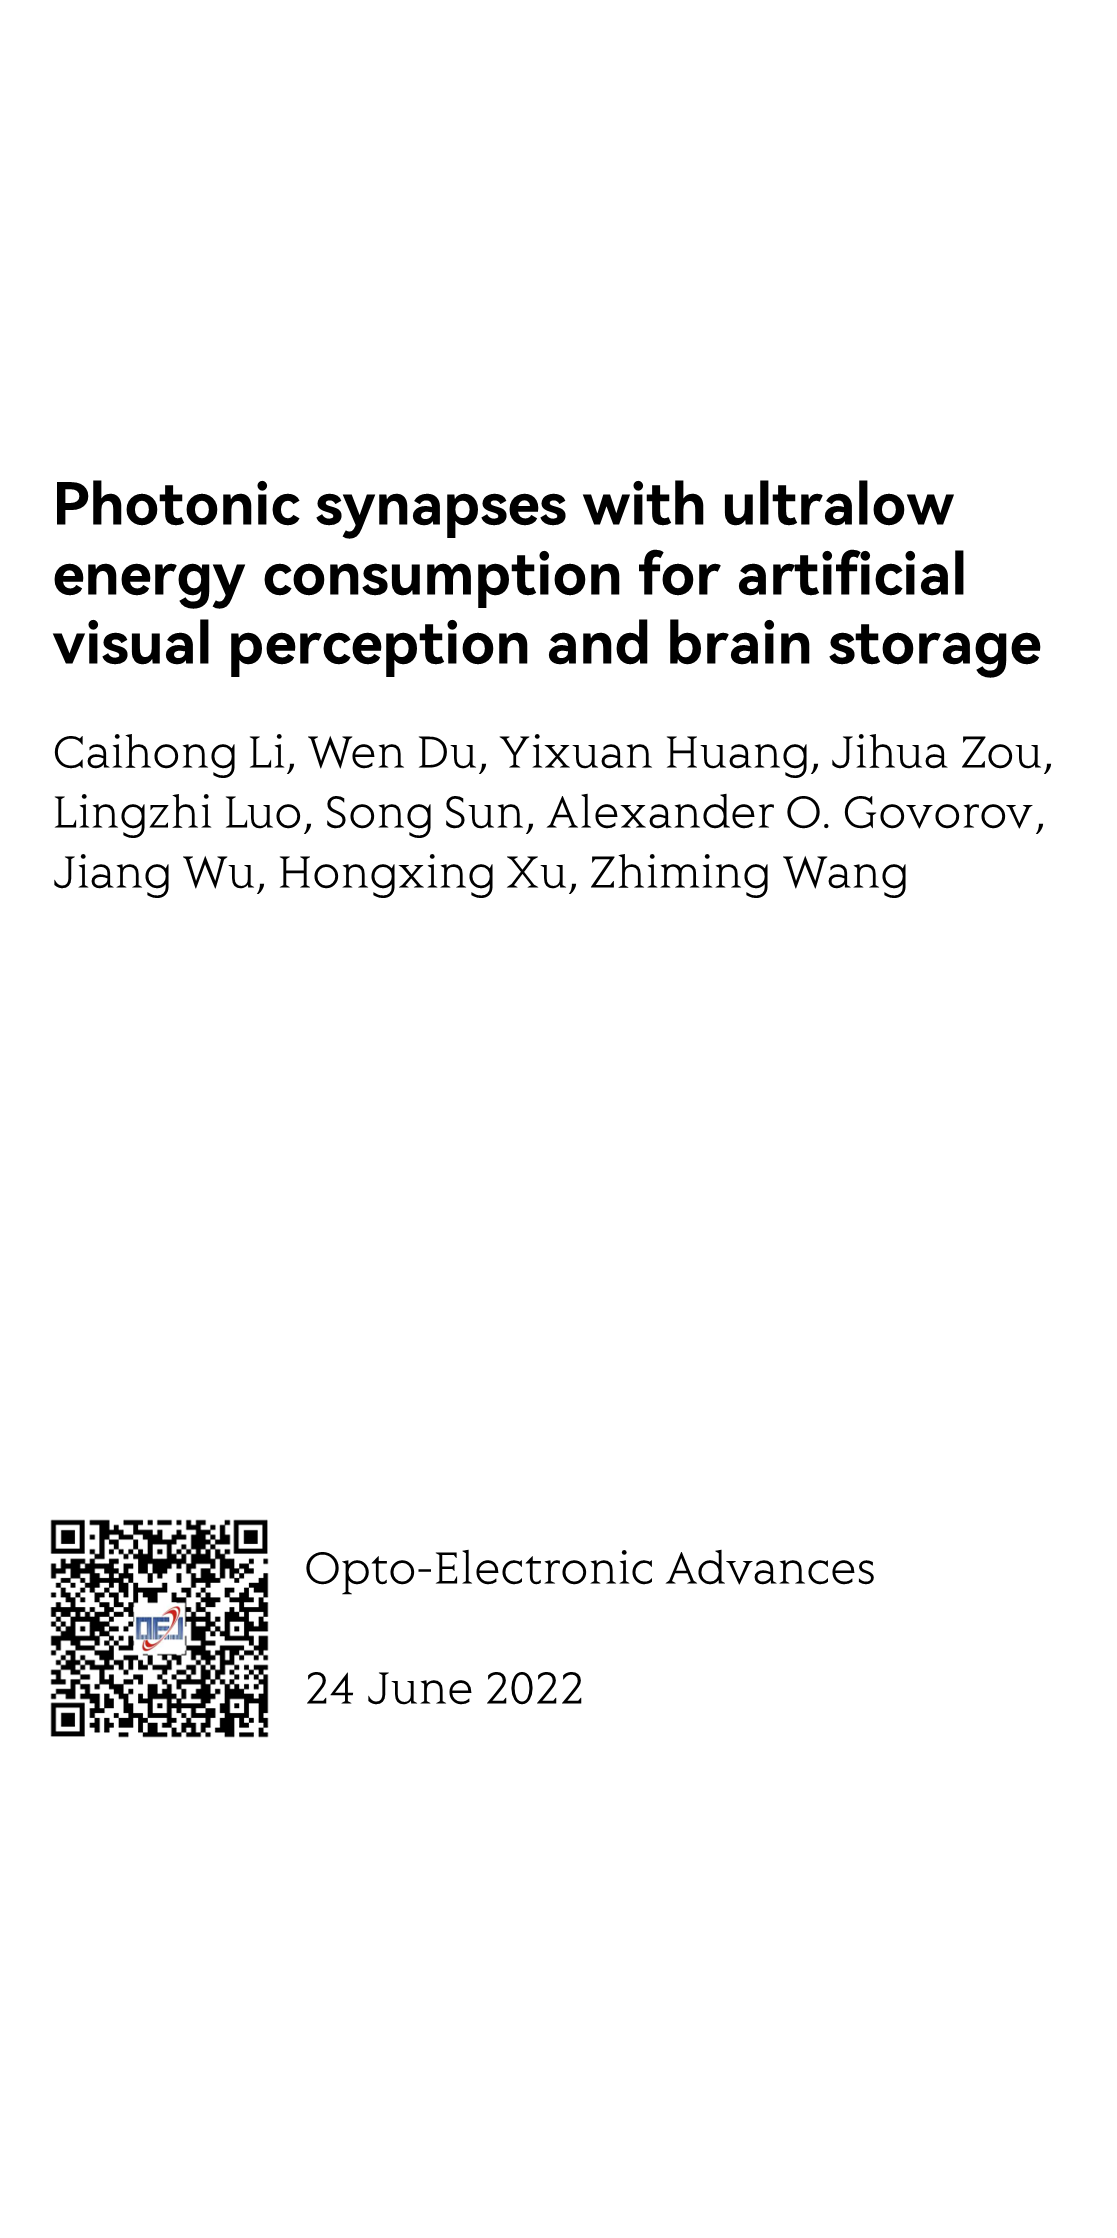 Photonic synapses with ultralow energy consumption for artificial visual perception and brain storage_1